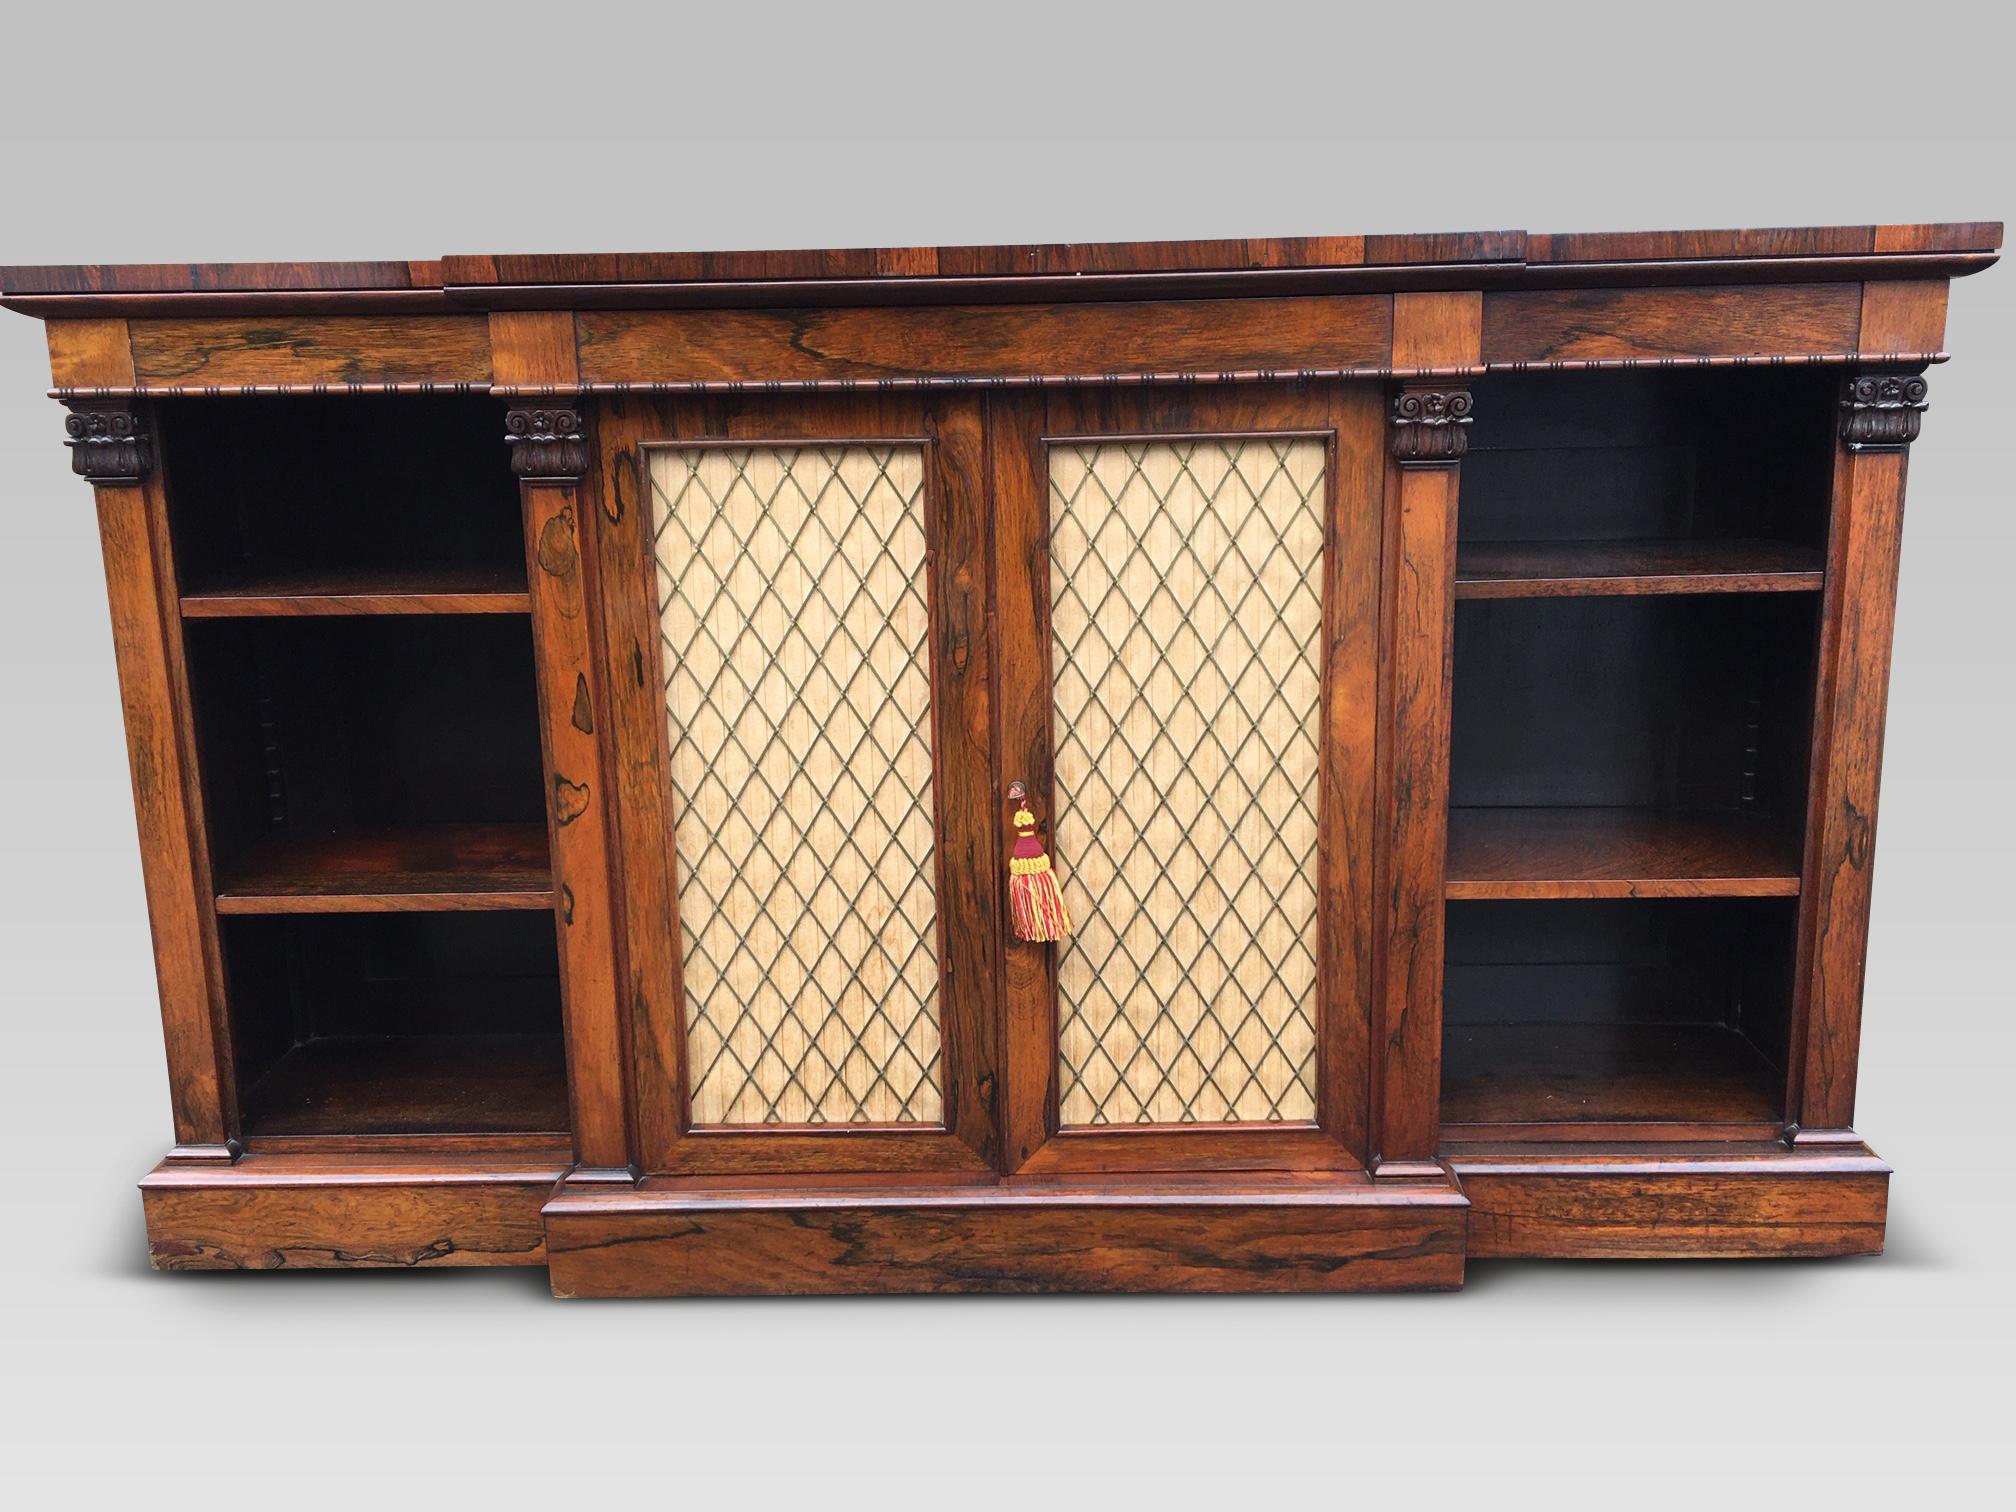 Fine quality English rosewood bookcase from the Regency period.
This delightful bookcase has strongly grained rosewood veneers, crisp features and a deep rich finish with patination.
There are 6 adjustable shelves. The central breakfront has a